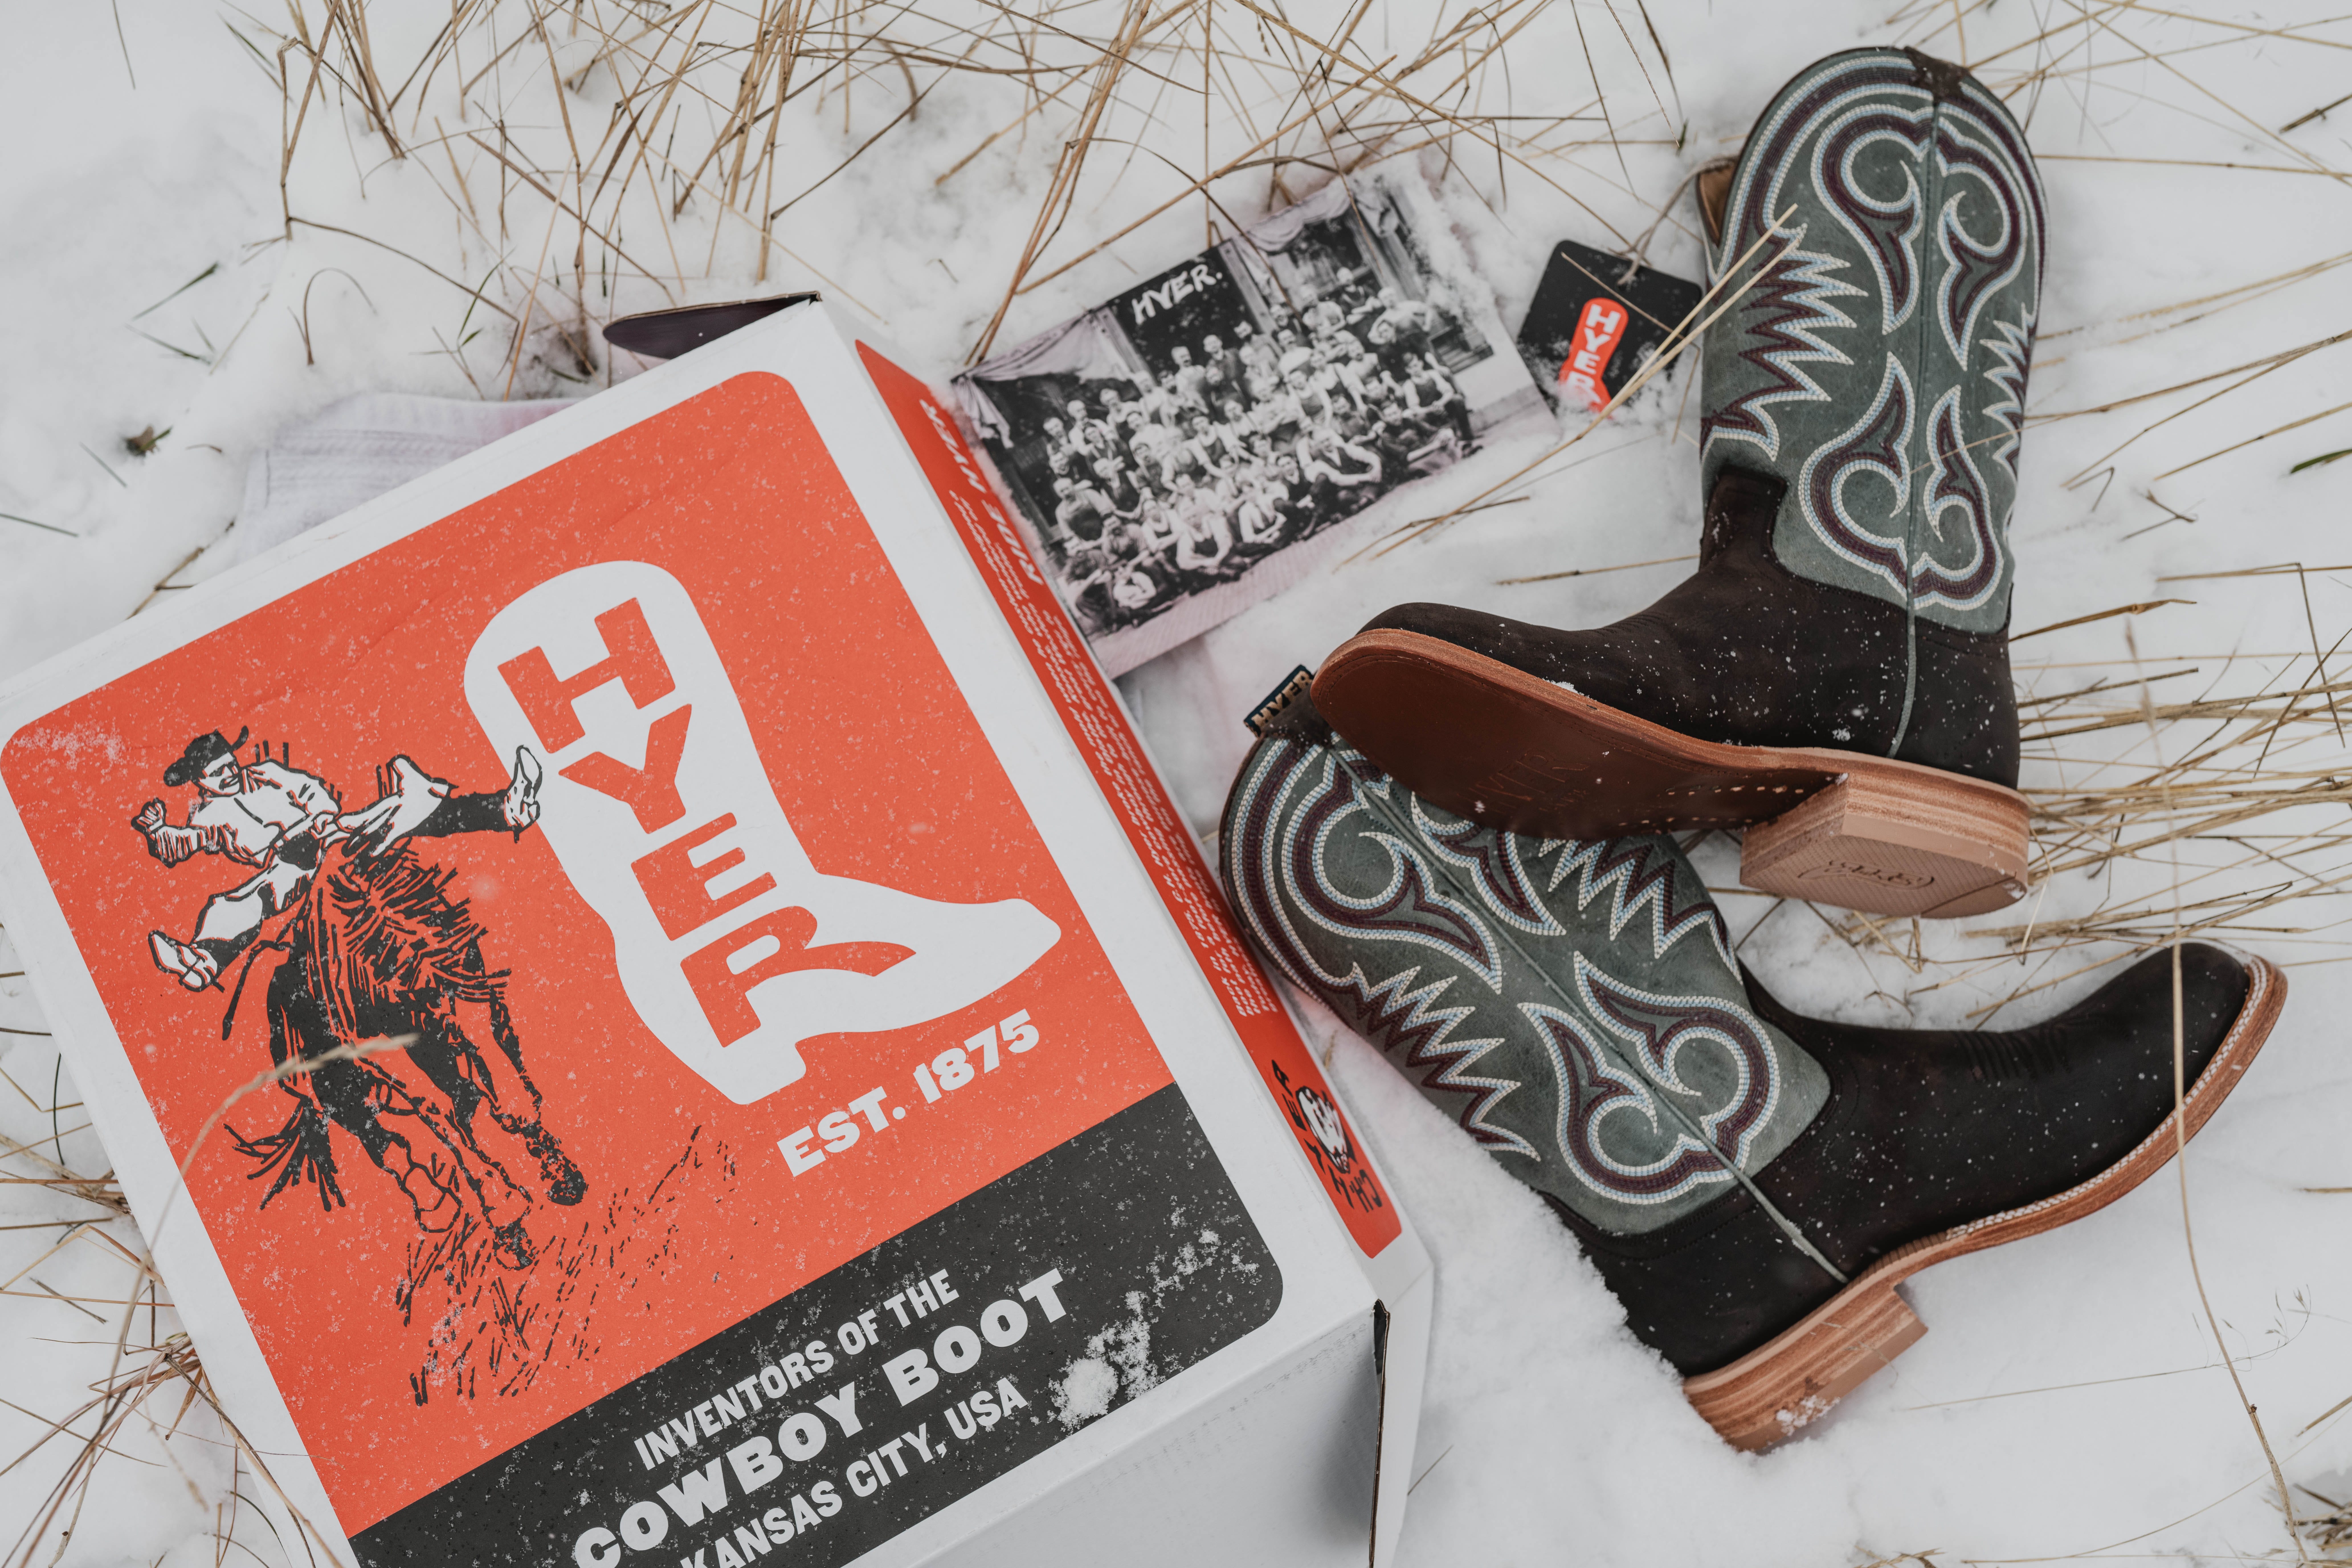 A winter layout of Hyer cowboy boots, their box and info card over snow and straw